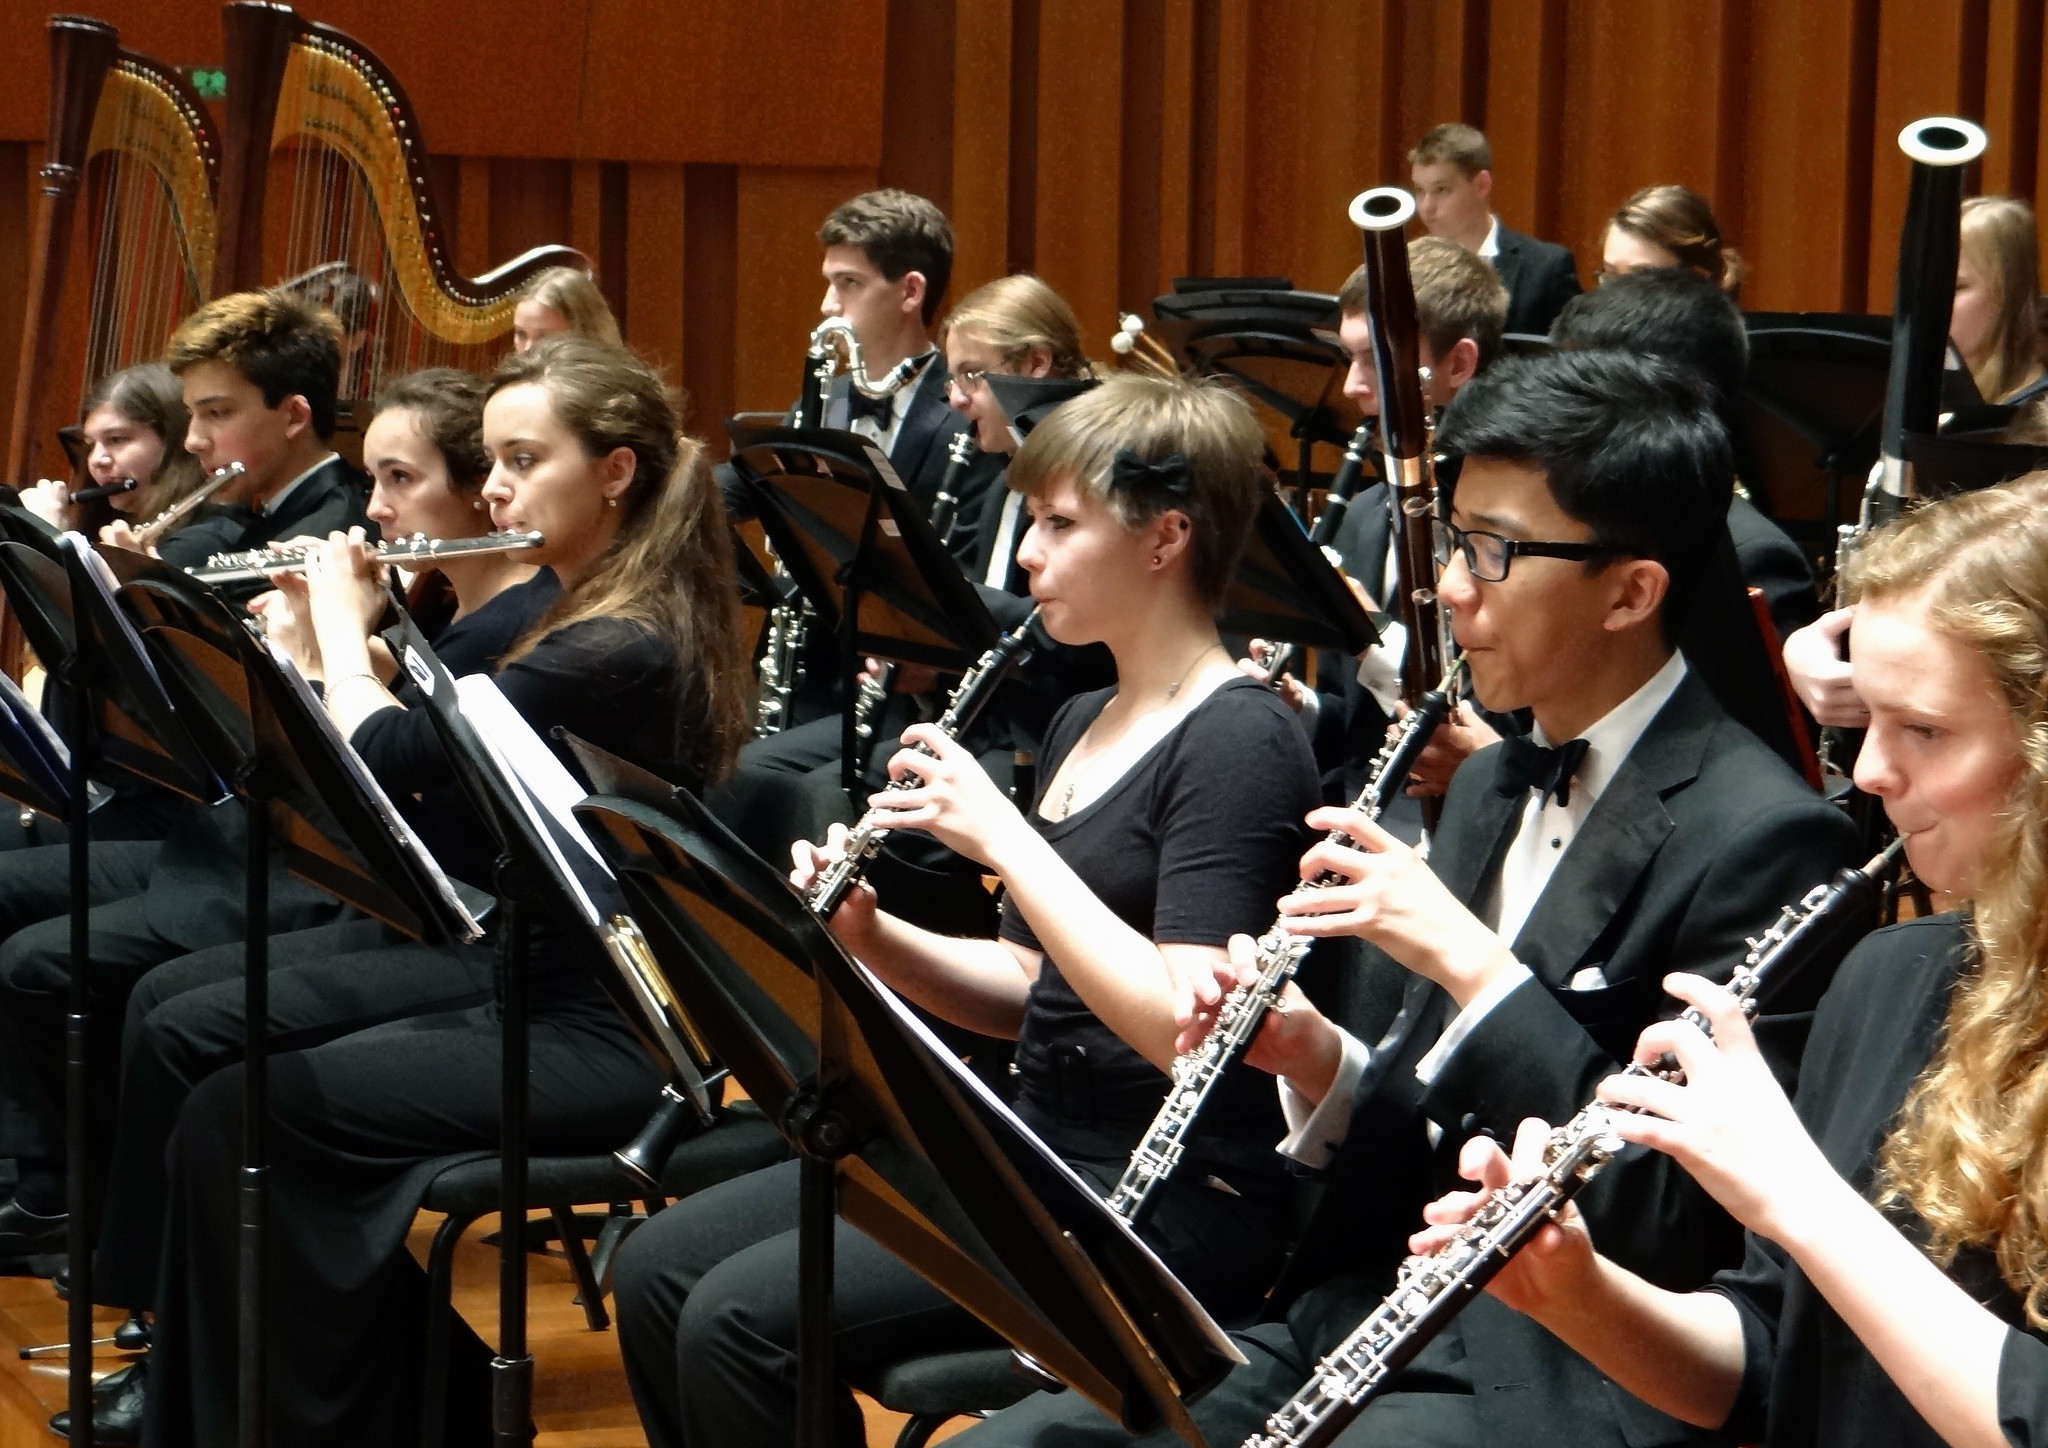 CYSO's Flute and Oboe Sections Rehearsing @ National Centre for Performing Arts